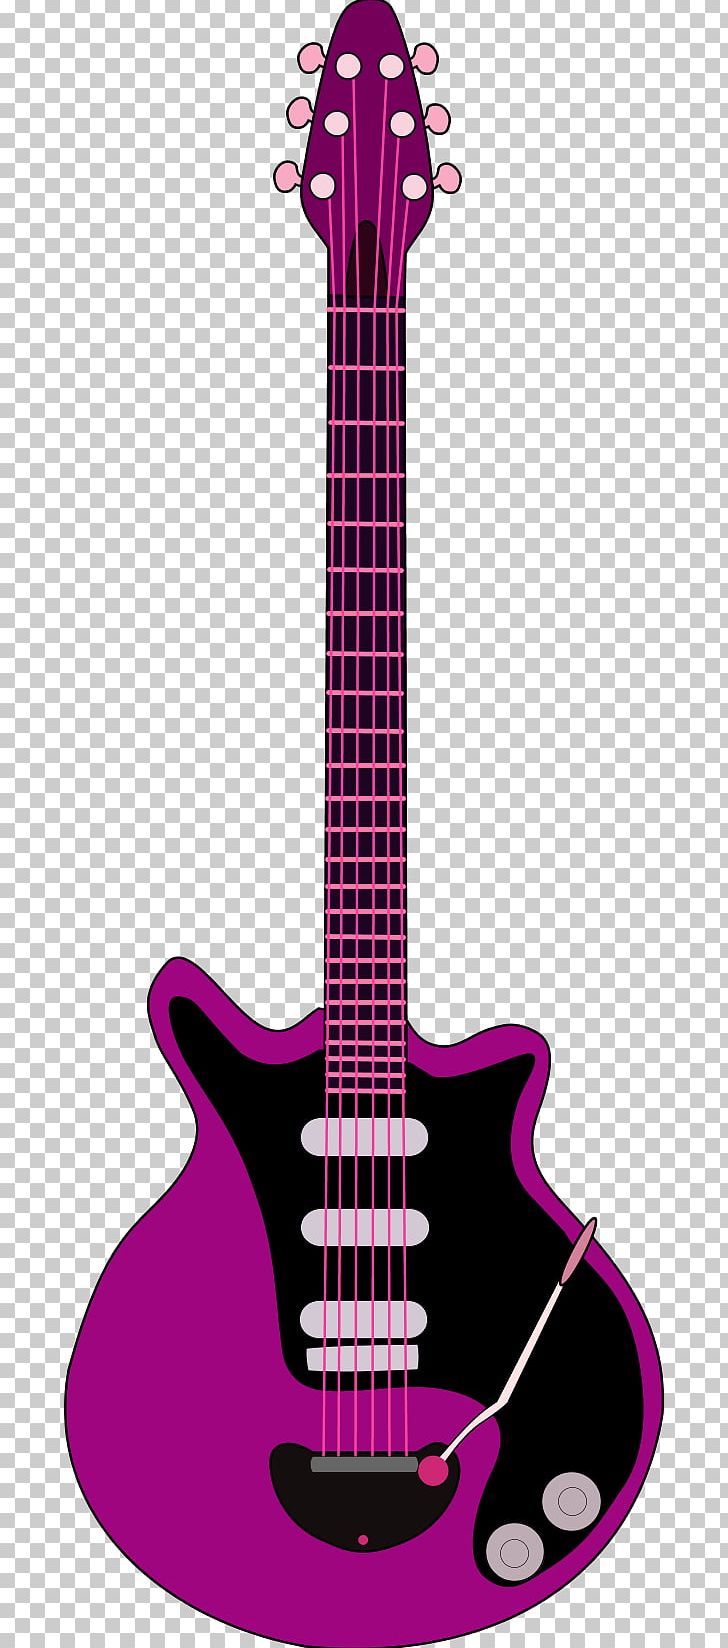 Red Special Electric Guitar PNG, Clipart, Acoustic Guitar, Guitar Accessory, Guitarist, Magenta, Musical Instrument Free PNG Download